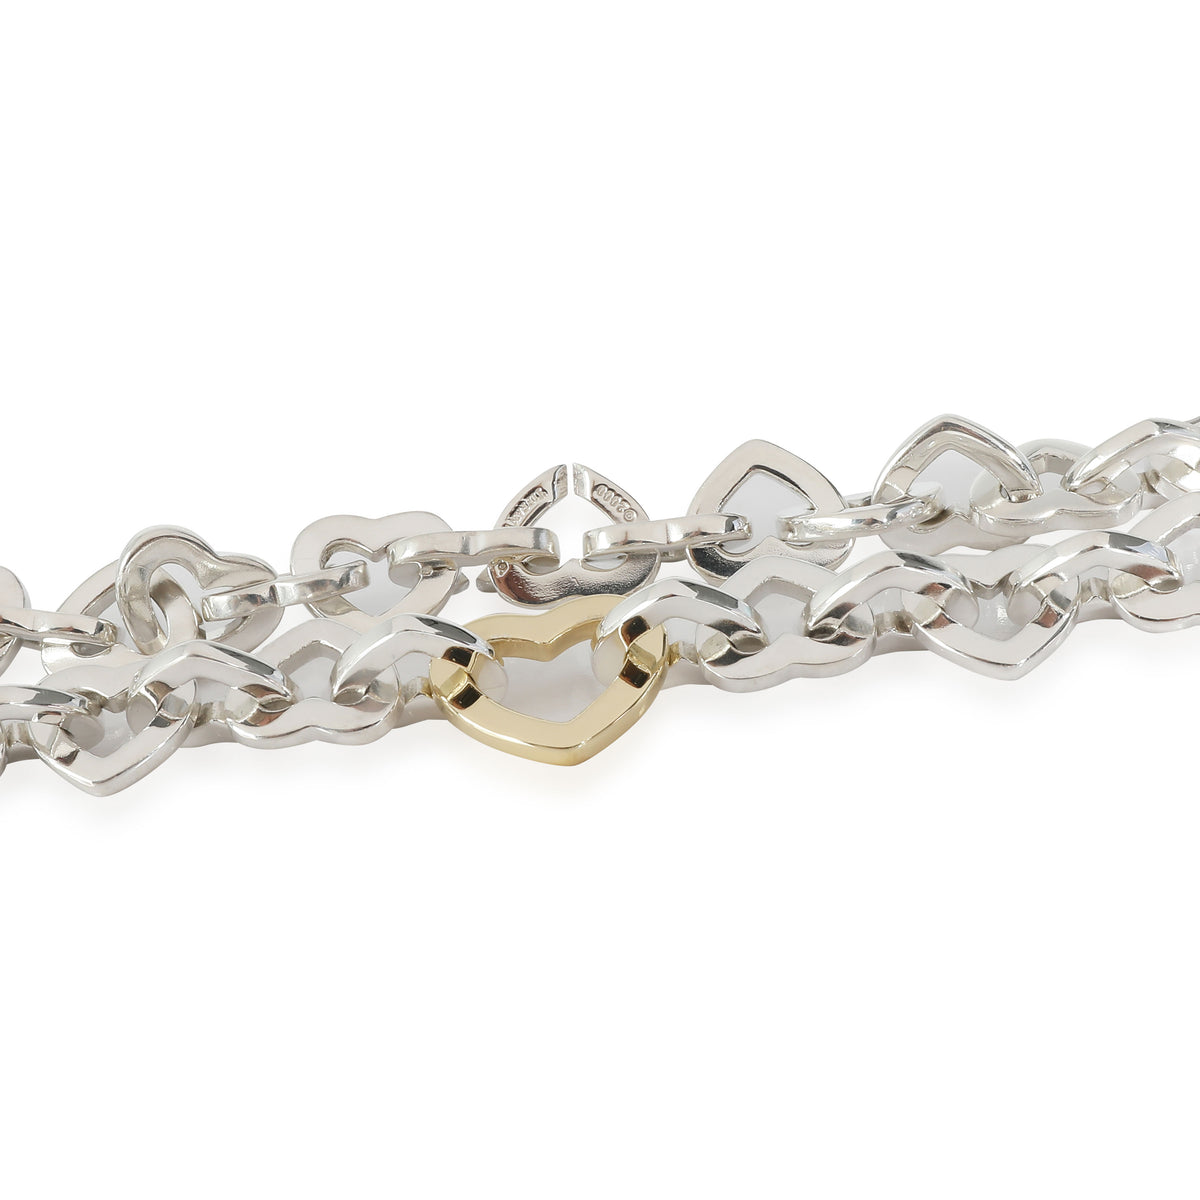 Heart Link Necklace in 18k Yellow Gold/Sterling Silver